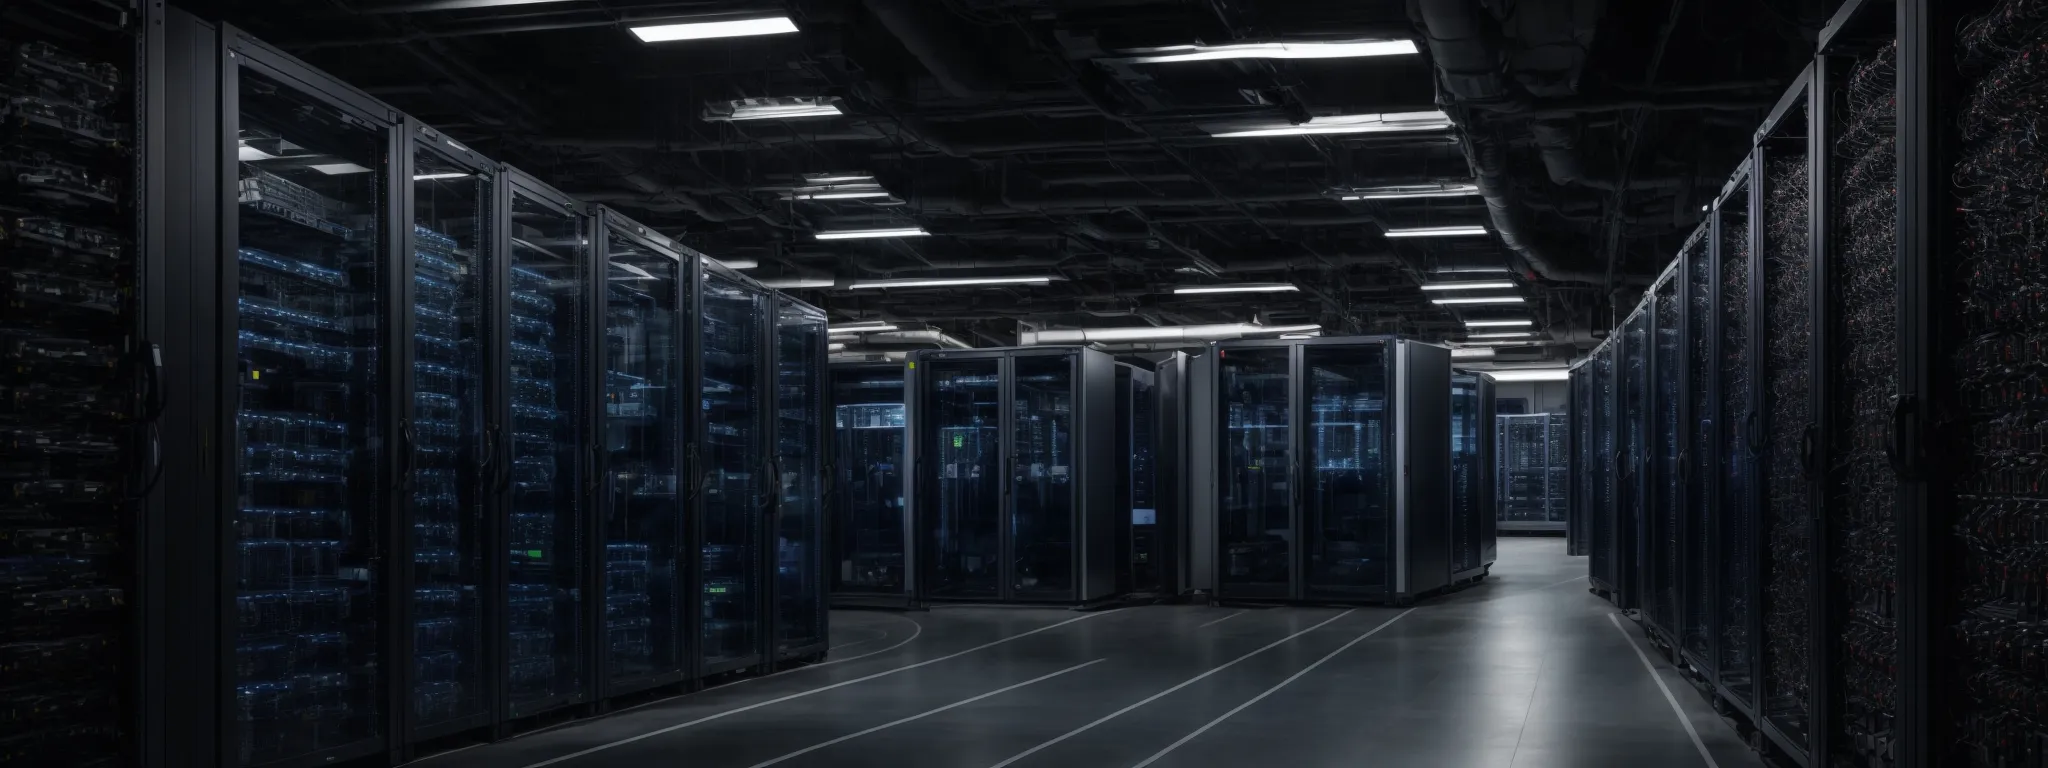 a wide server room with rows of high-tech equipment indicating a technologically advanced infrastructure supporting seo efforts.